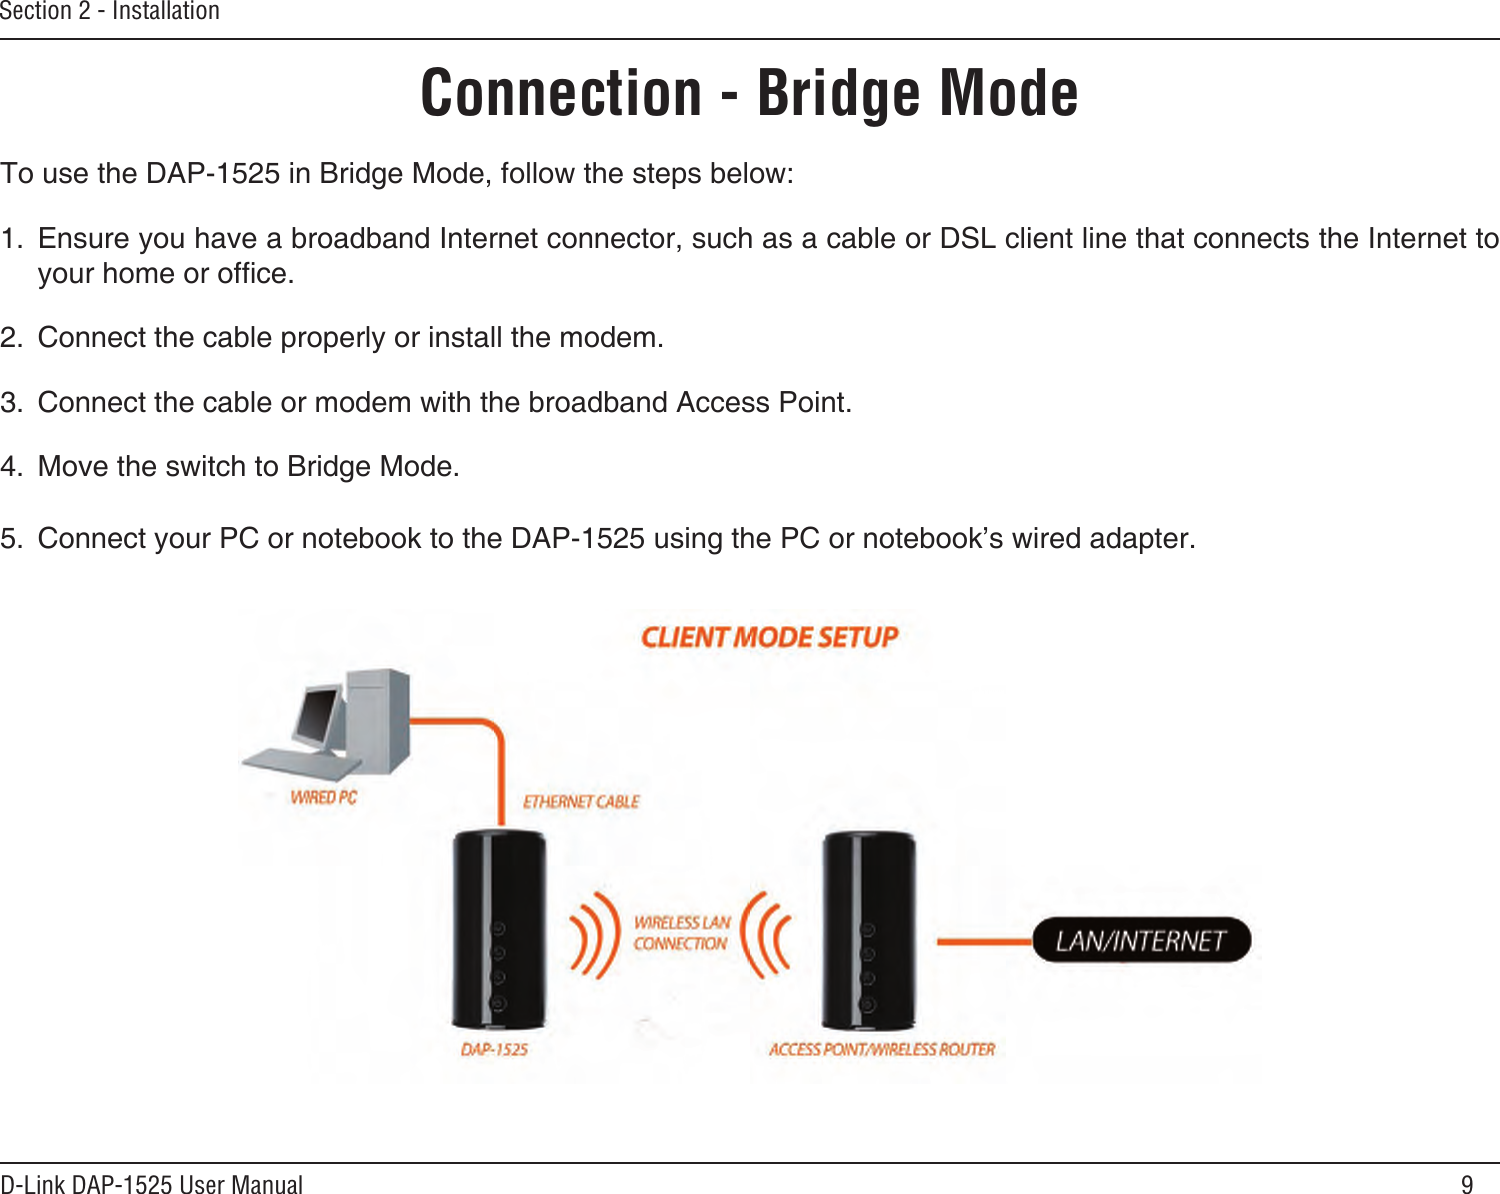 9D-Link DAP-1525 User ManualSection 2 - InstallationConnection - Bridge ModeTo use the DAP-1525 in Bridge Mode, follow the steps below:1.  Ensure you have a broadband Internet connector, such as a cable or DSL client line that connects the Internet to your home or ofce. 2.  Connect the cable properly or install the modem.3.  Connect the cable or modem with the broadband Access Point.4.  Move the switch to Bridge Mode. 5.  Connect your PC or notebook to the DAP-1525 using the PC or notebook’s wired adapter.